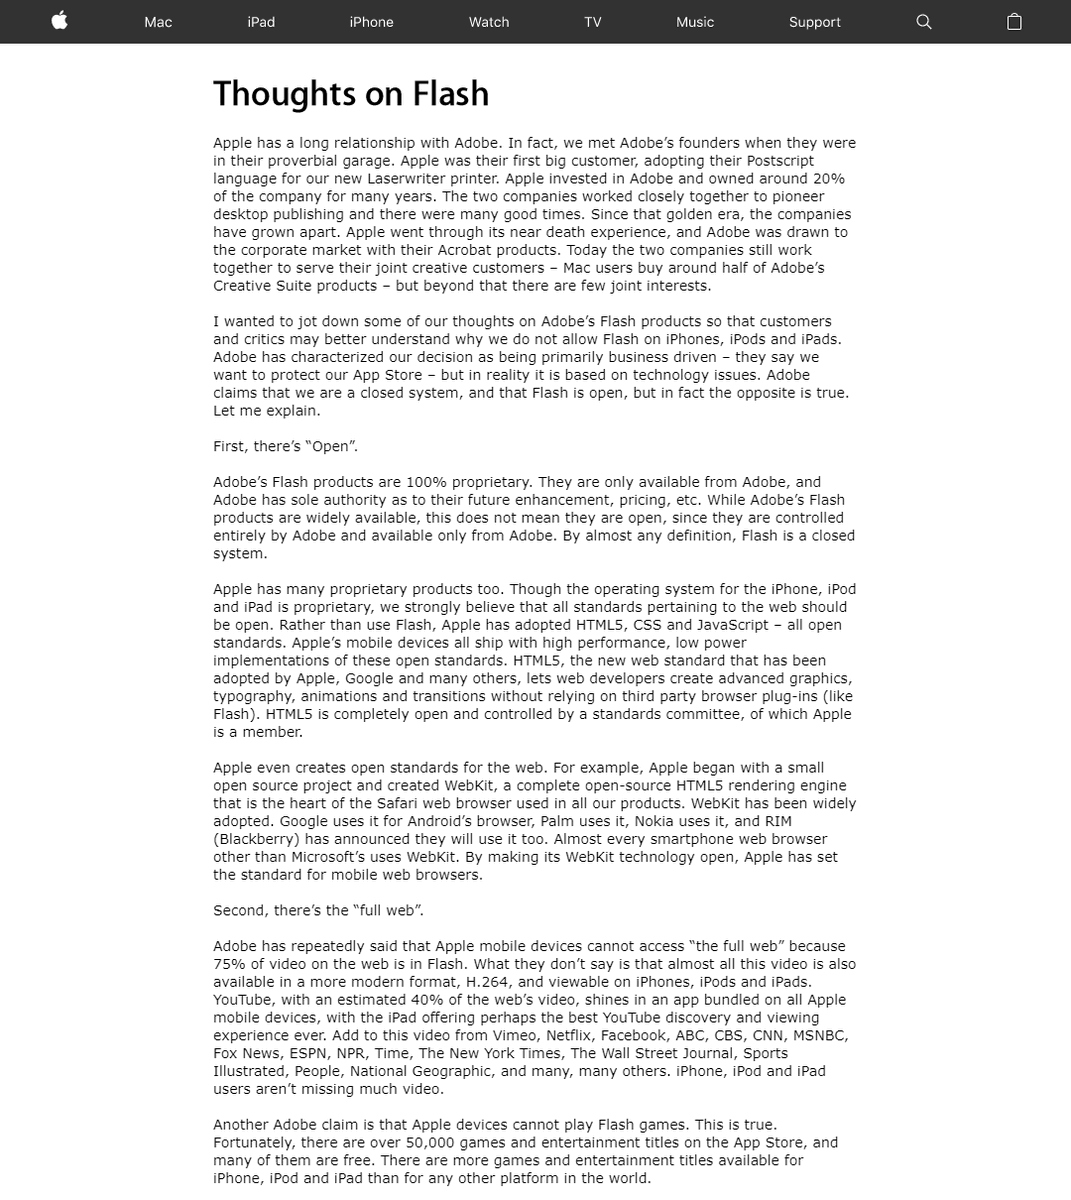 On 29 April, 2010, Steve Jobs penned a controversial open letter titled “Thoughts on Flash” while he was CEO of Apple, criticizing Adobe Flash and outlining why it would not be permitted on Apple’s iOS hardware. 

webdesignmuseum.org/web-design-his…

#WebDesignHistory